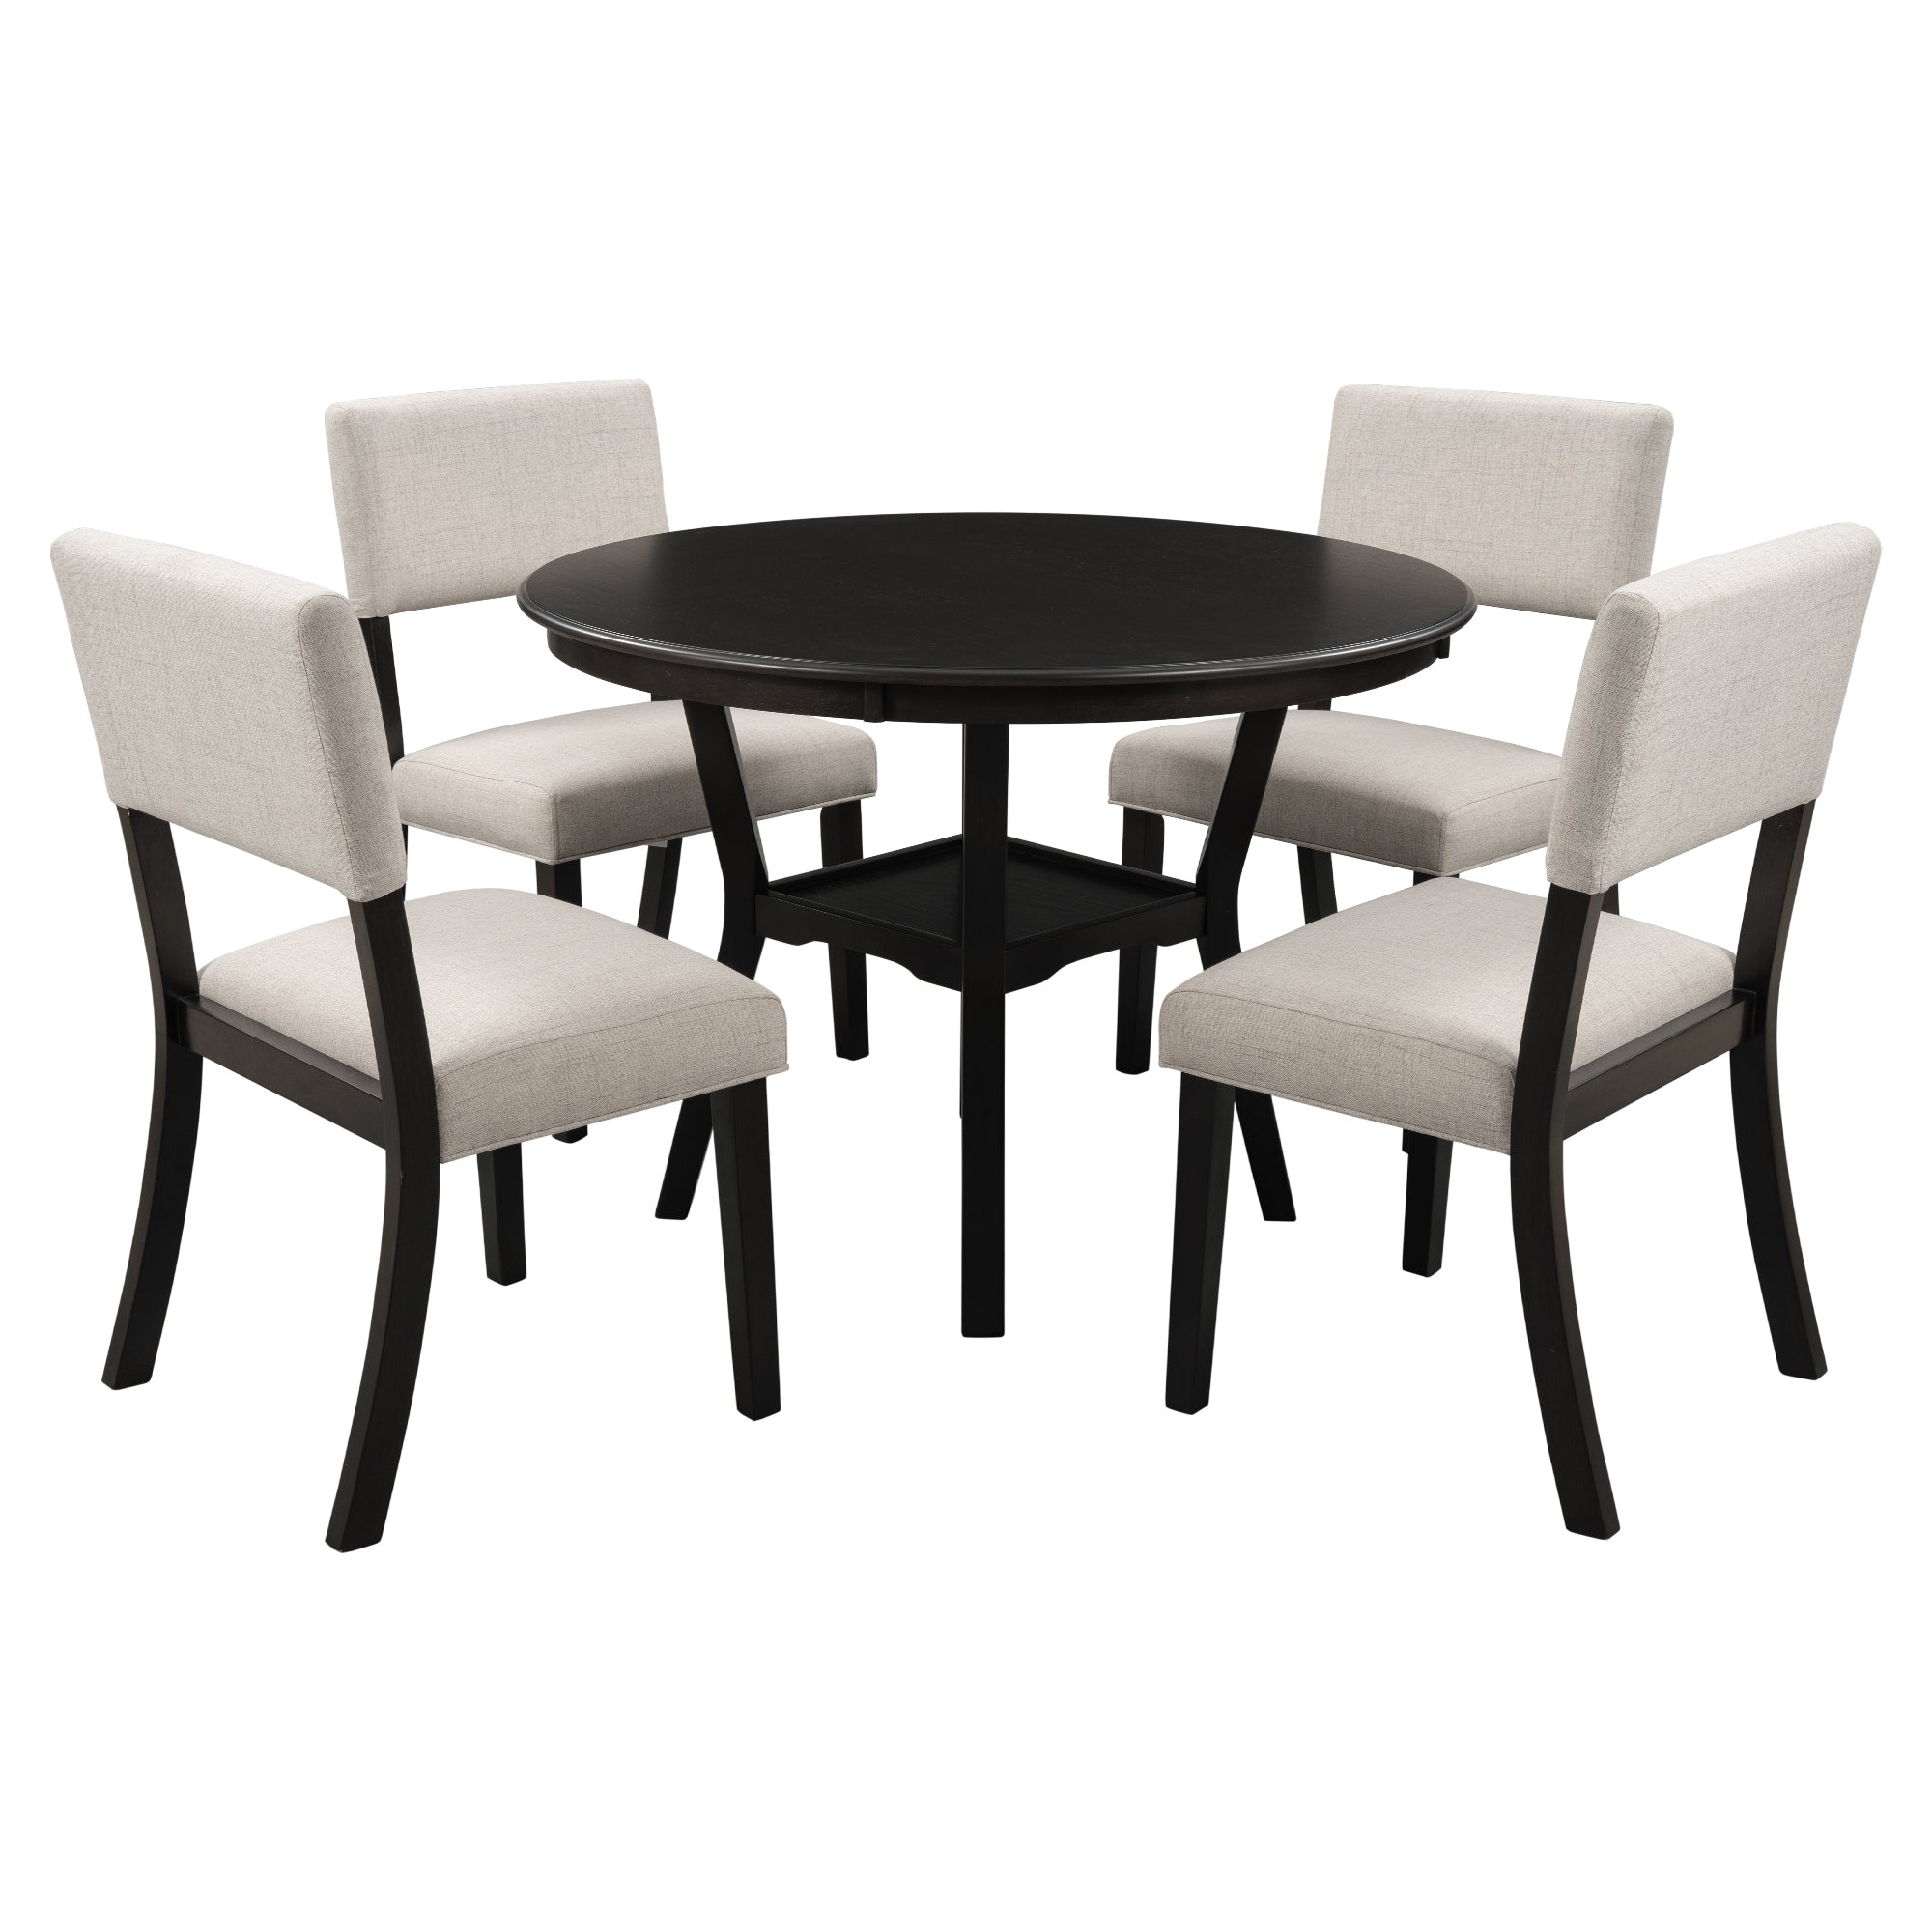 TREXM 5-Piece Kitchen Dining Table Set Round Table with Bottom Shelf, 4 Upholstered Chairs for Dining Room（Espresso）